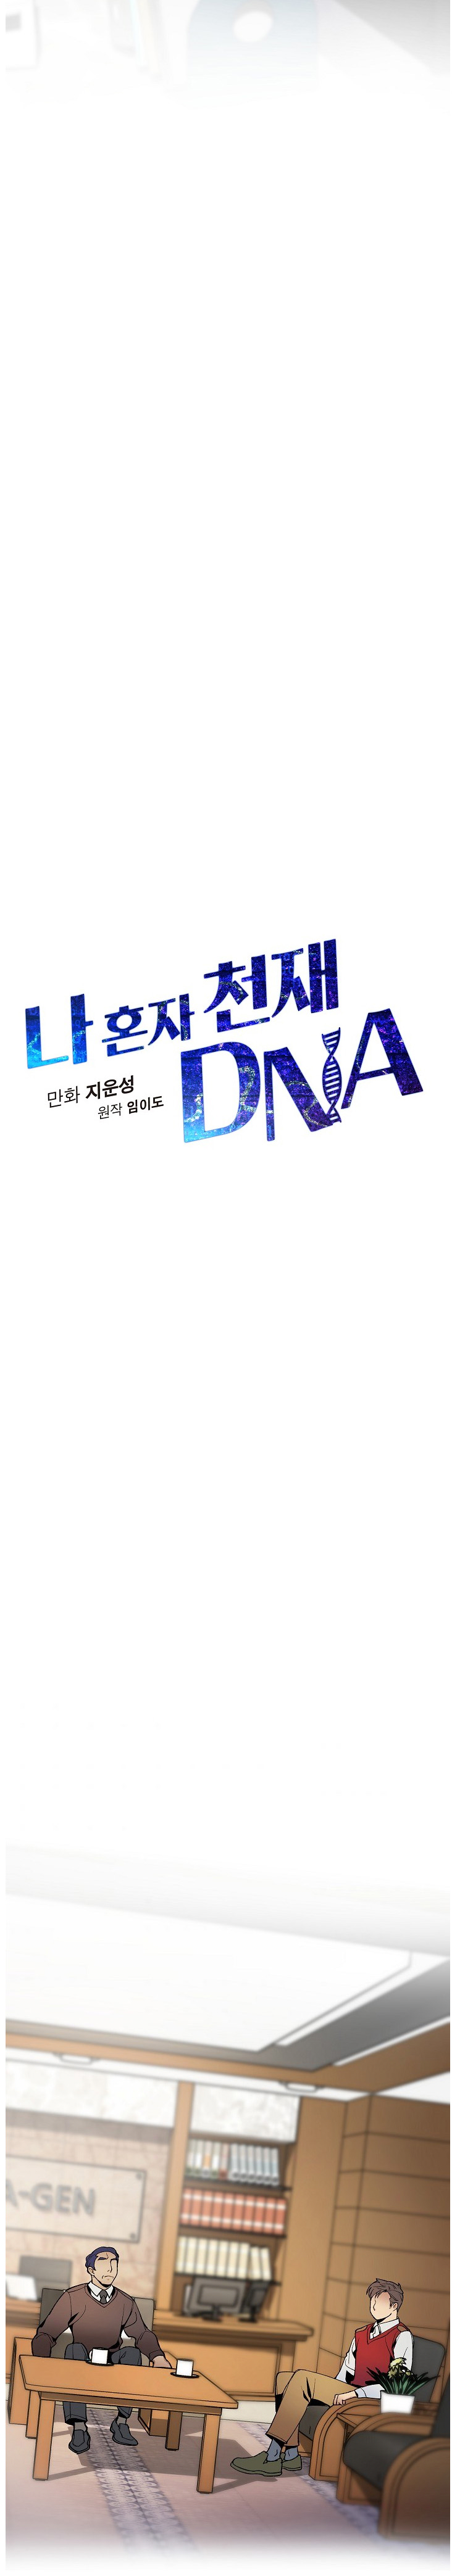 I’M The Only One With Genius Dna - Page 3